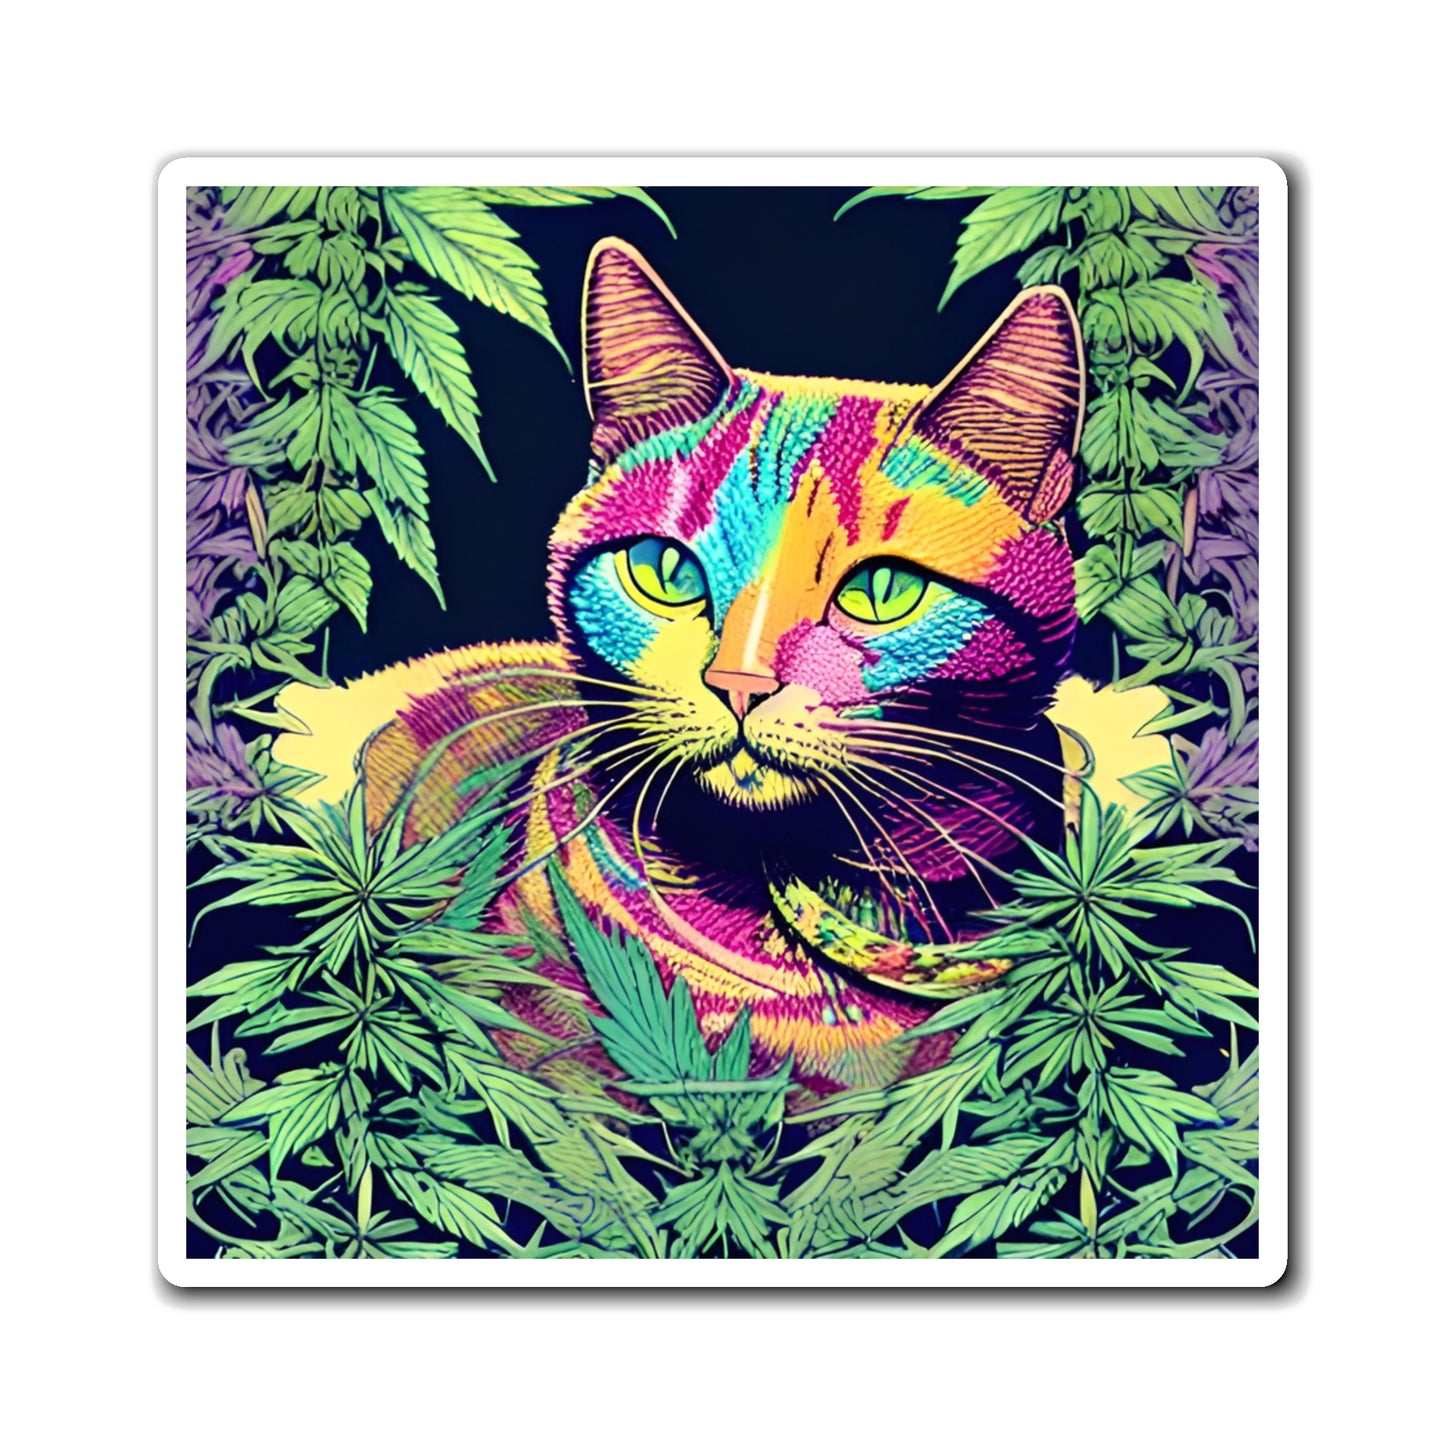 Cannabis Kitty Magnet No. 5 - A Unique Delight 3" x 3" Decorative Accent Gift for Cat & Cannabis Lovers!